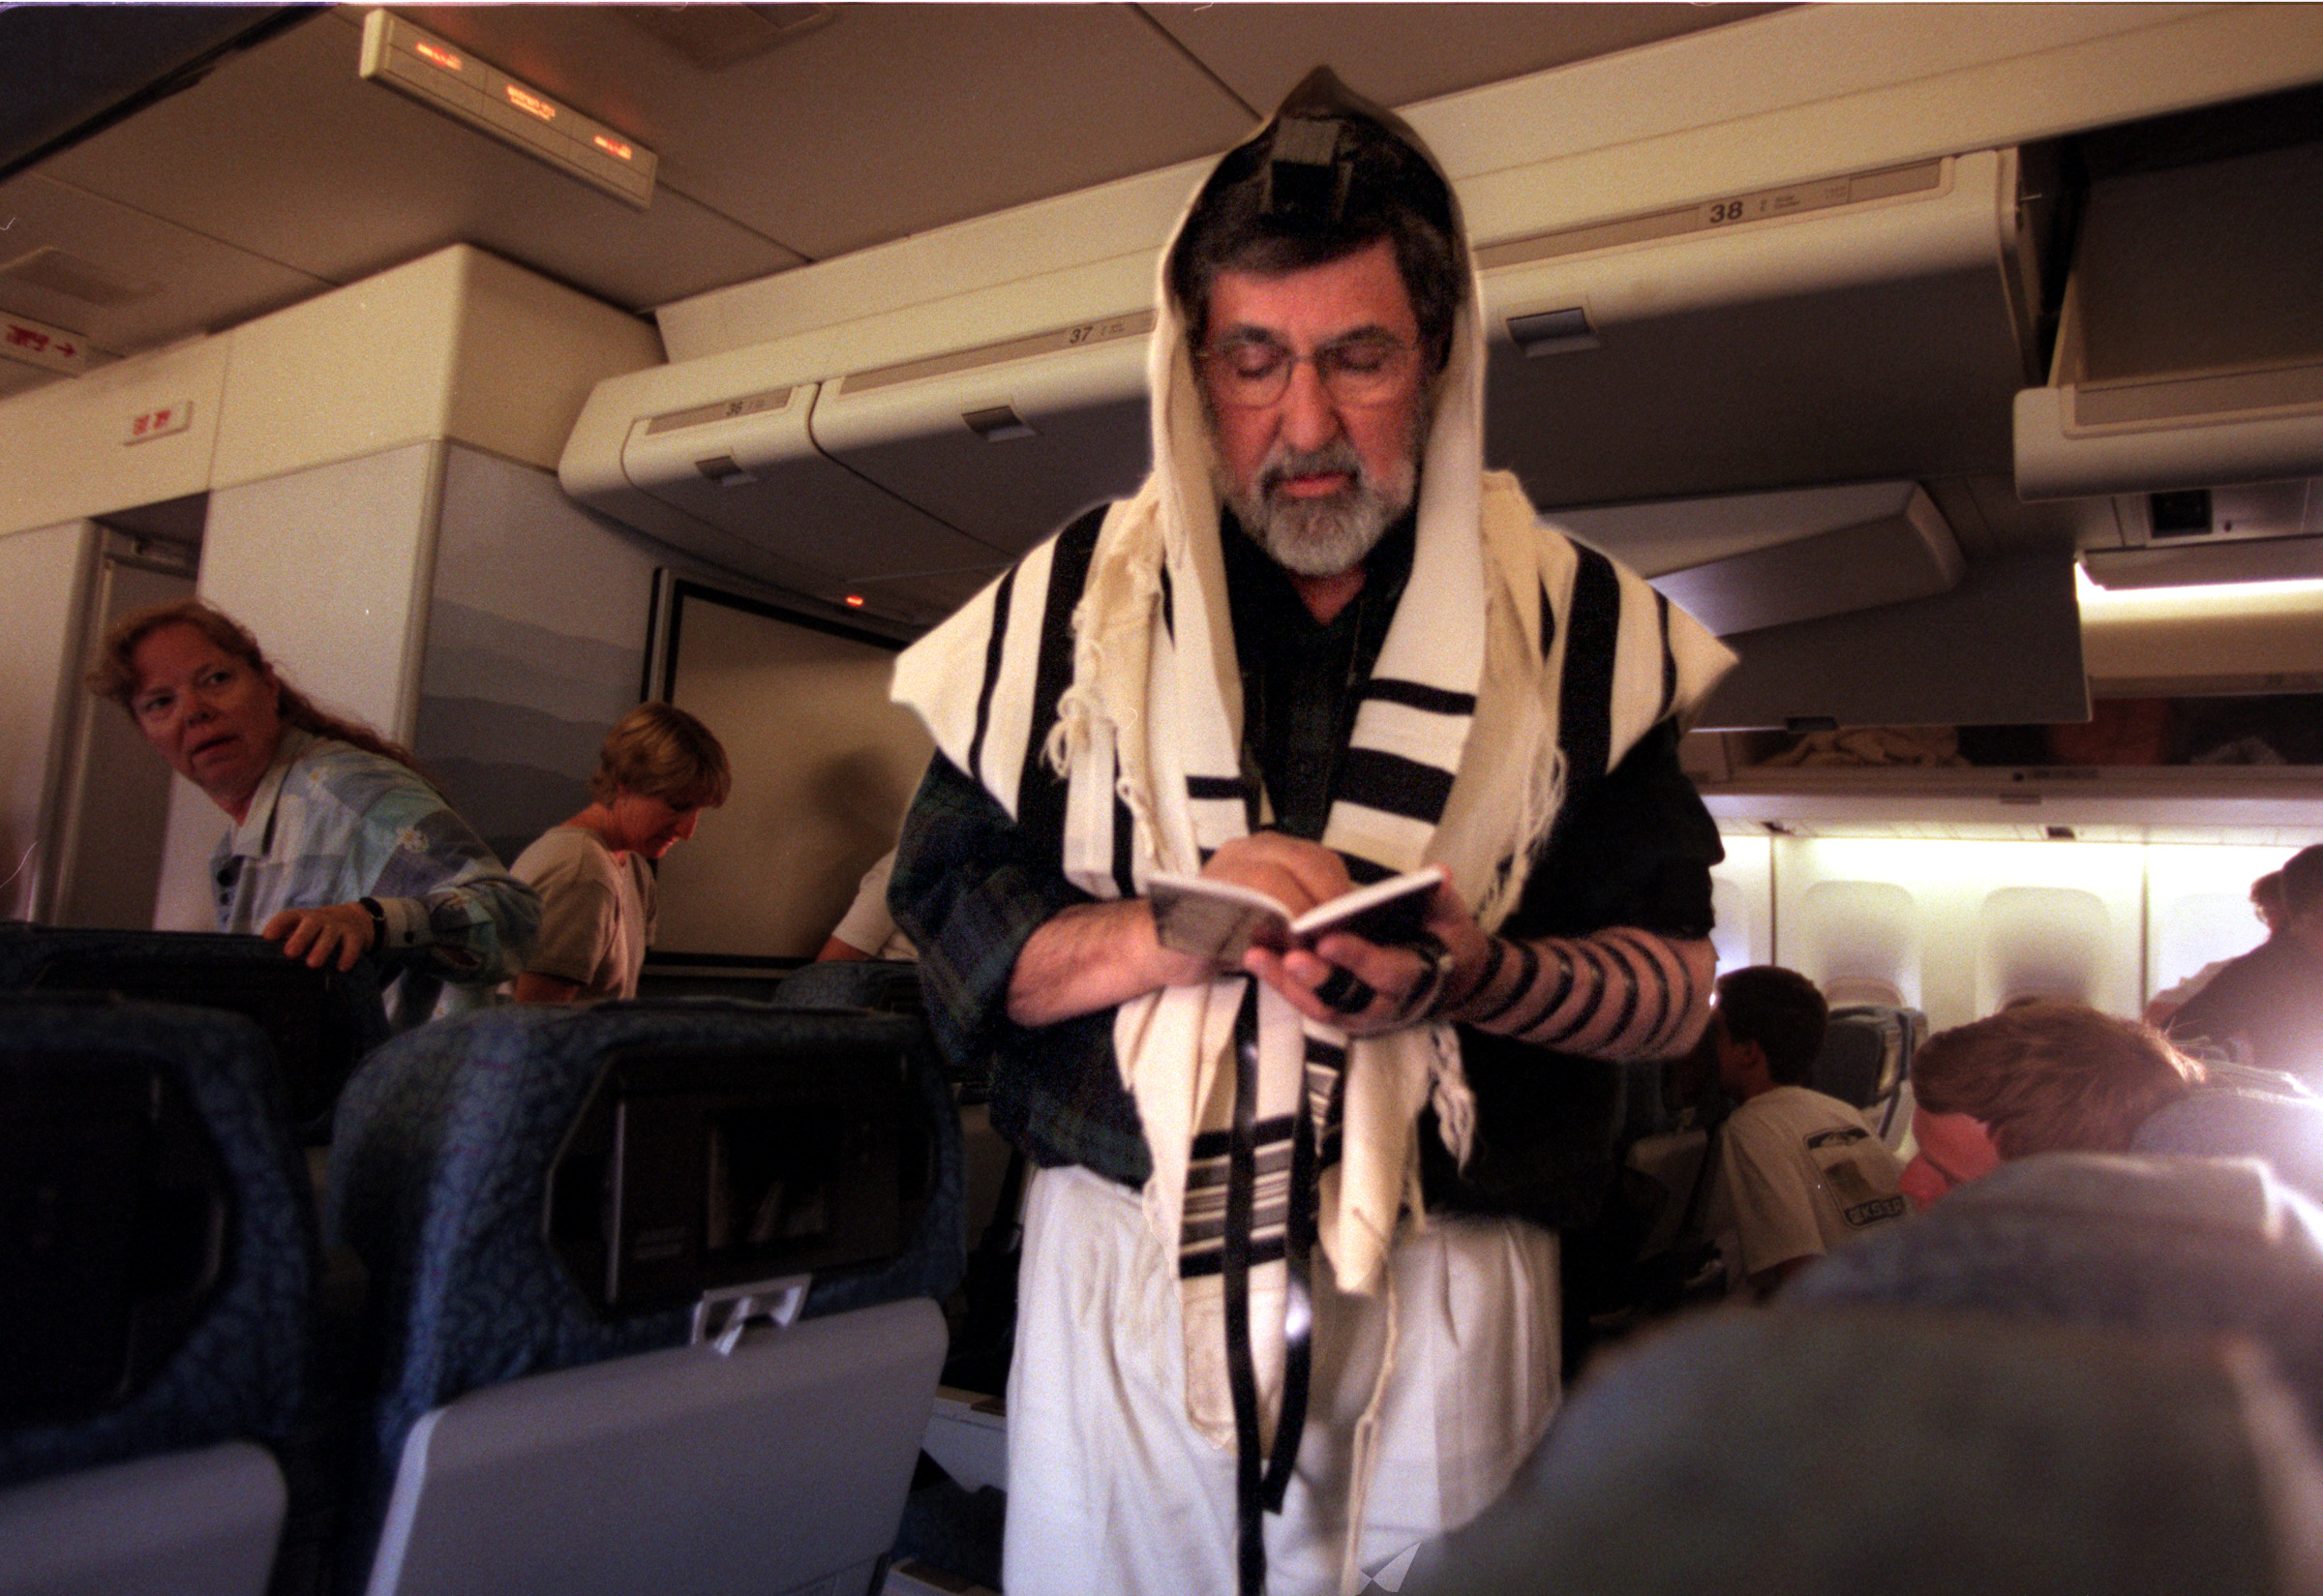  Rabbi Bernard King prays every morning at daybreak using the Tefillin, (transcriptionsfrom the text and quotations from the books of Exodus and Deuteronomy). During the flight to the Holy Land was no exception. As the plane refueled in Chicago, the 